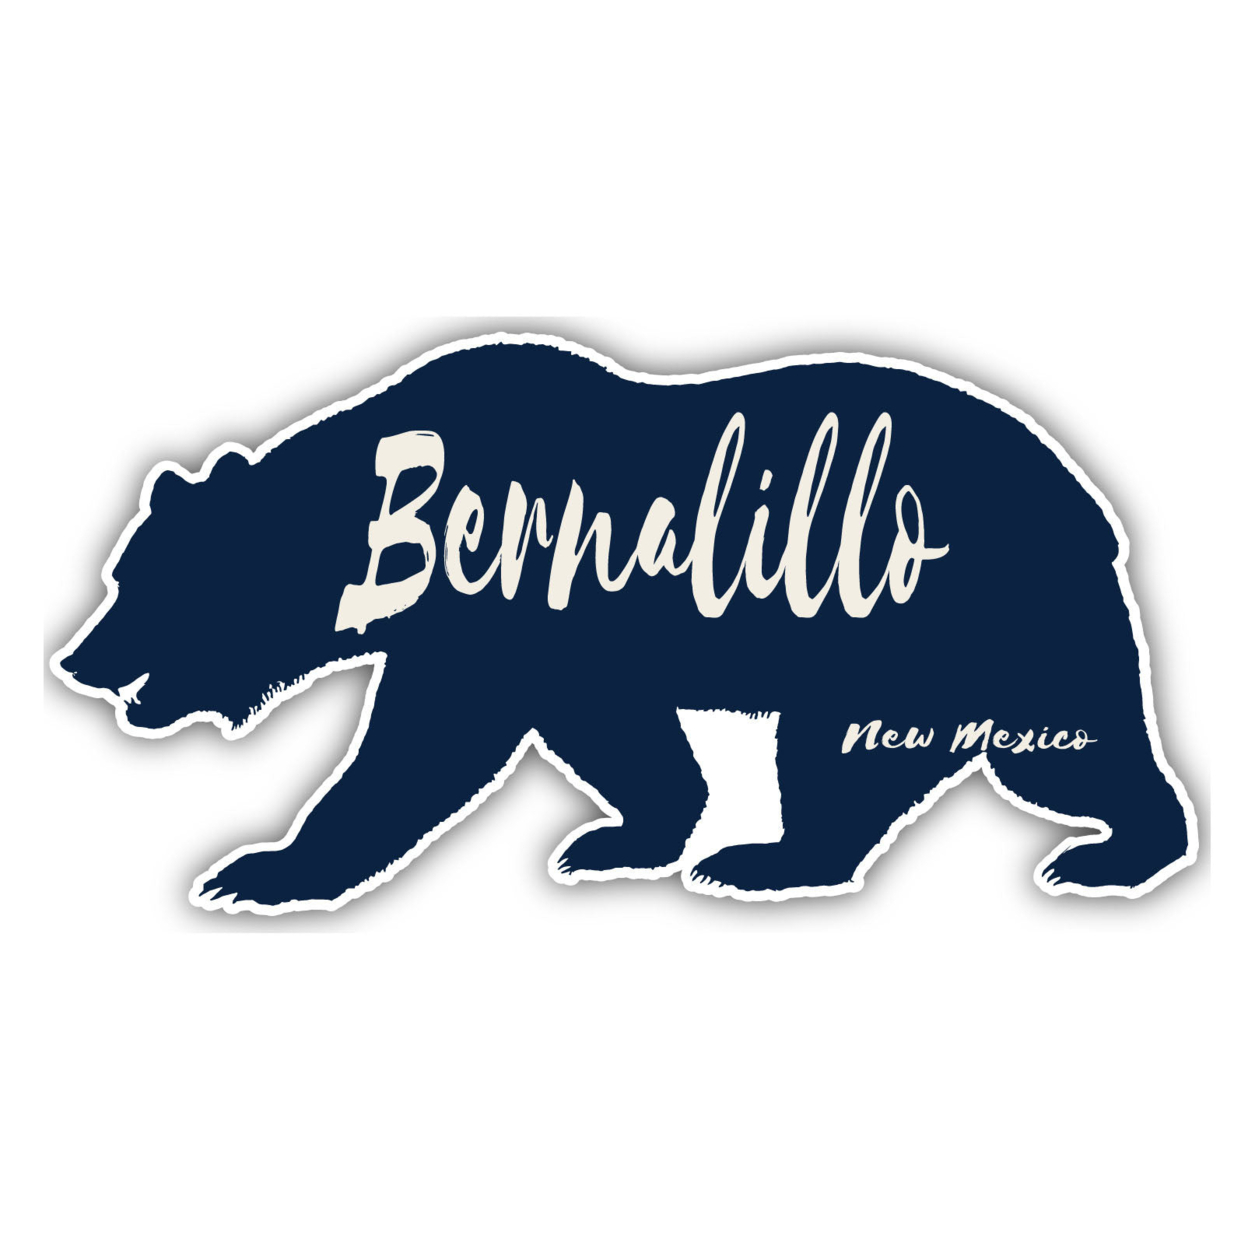 Bernalillo New Mexico Souvenir Decorative Stickers (Choose Theme And Size) - 4-Pack, 6-Inch, Tent